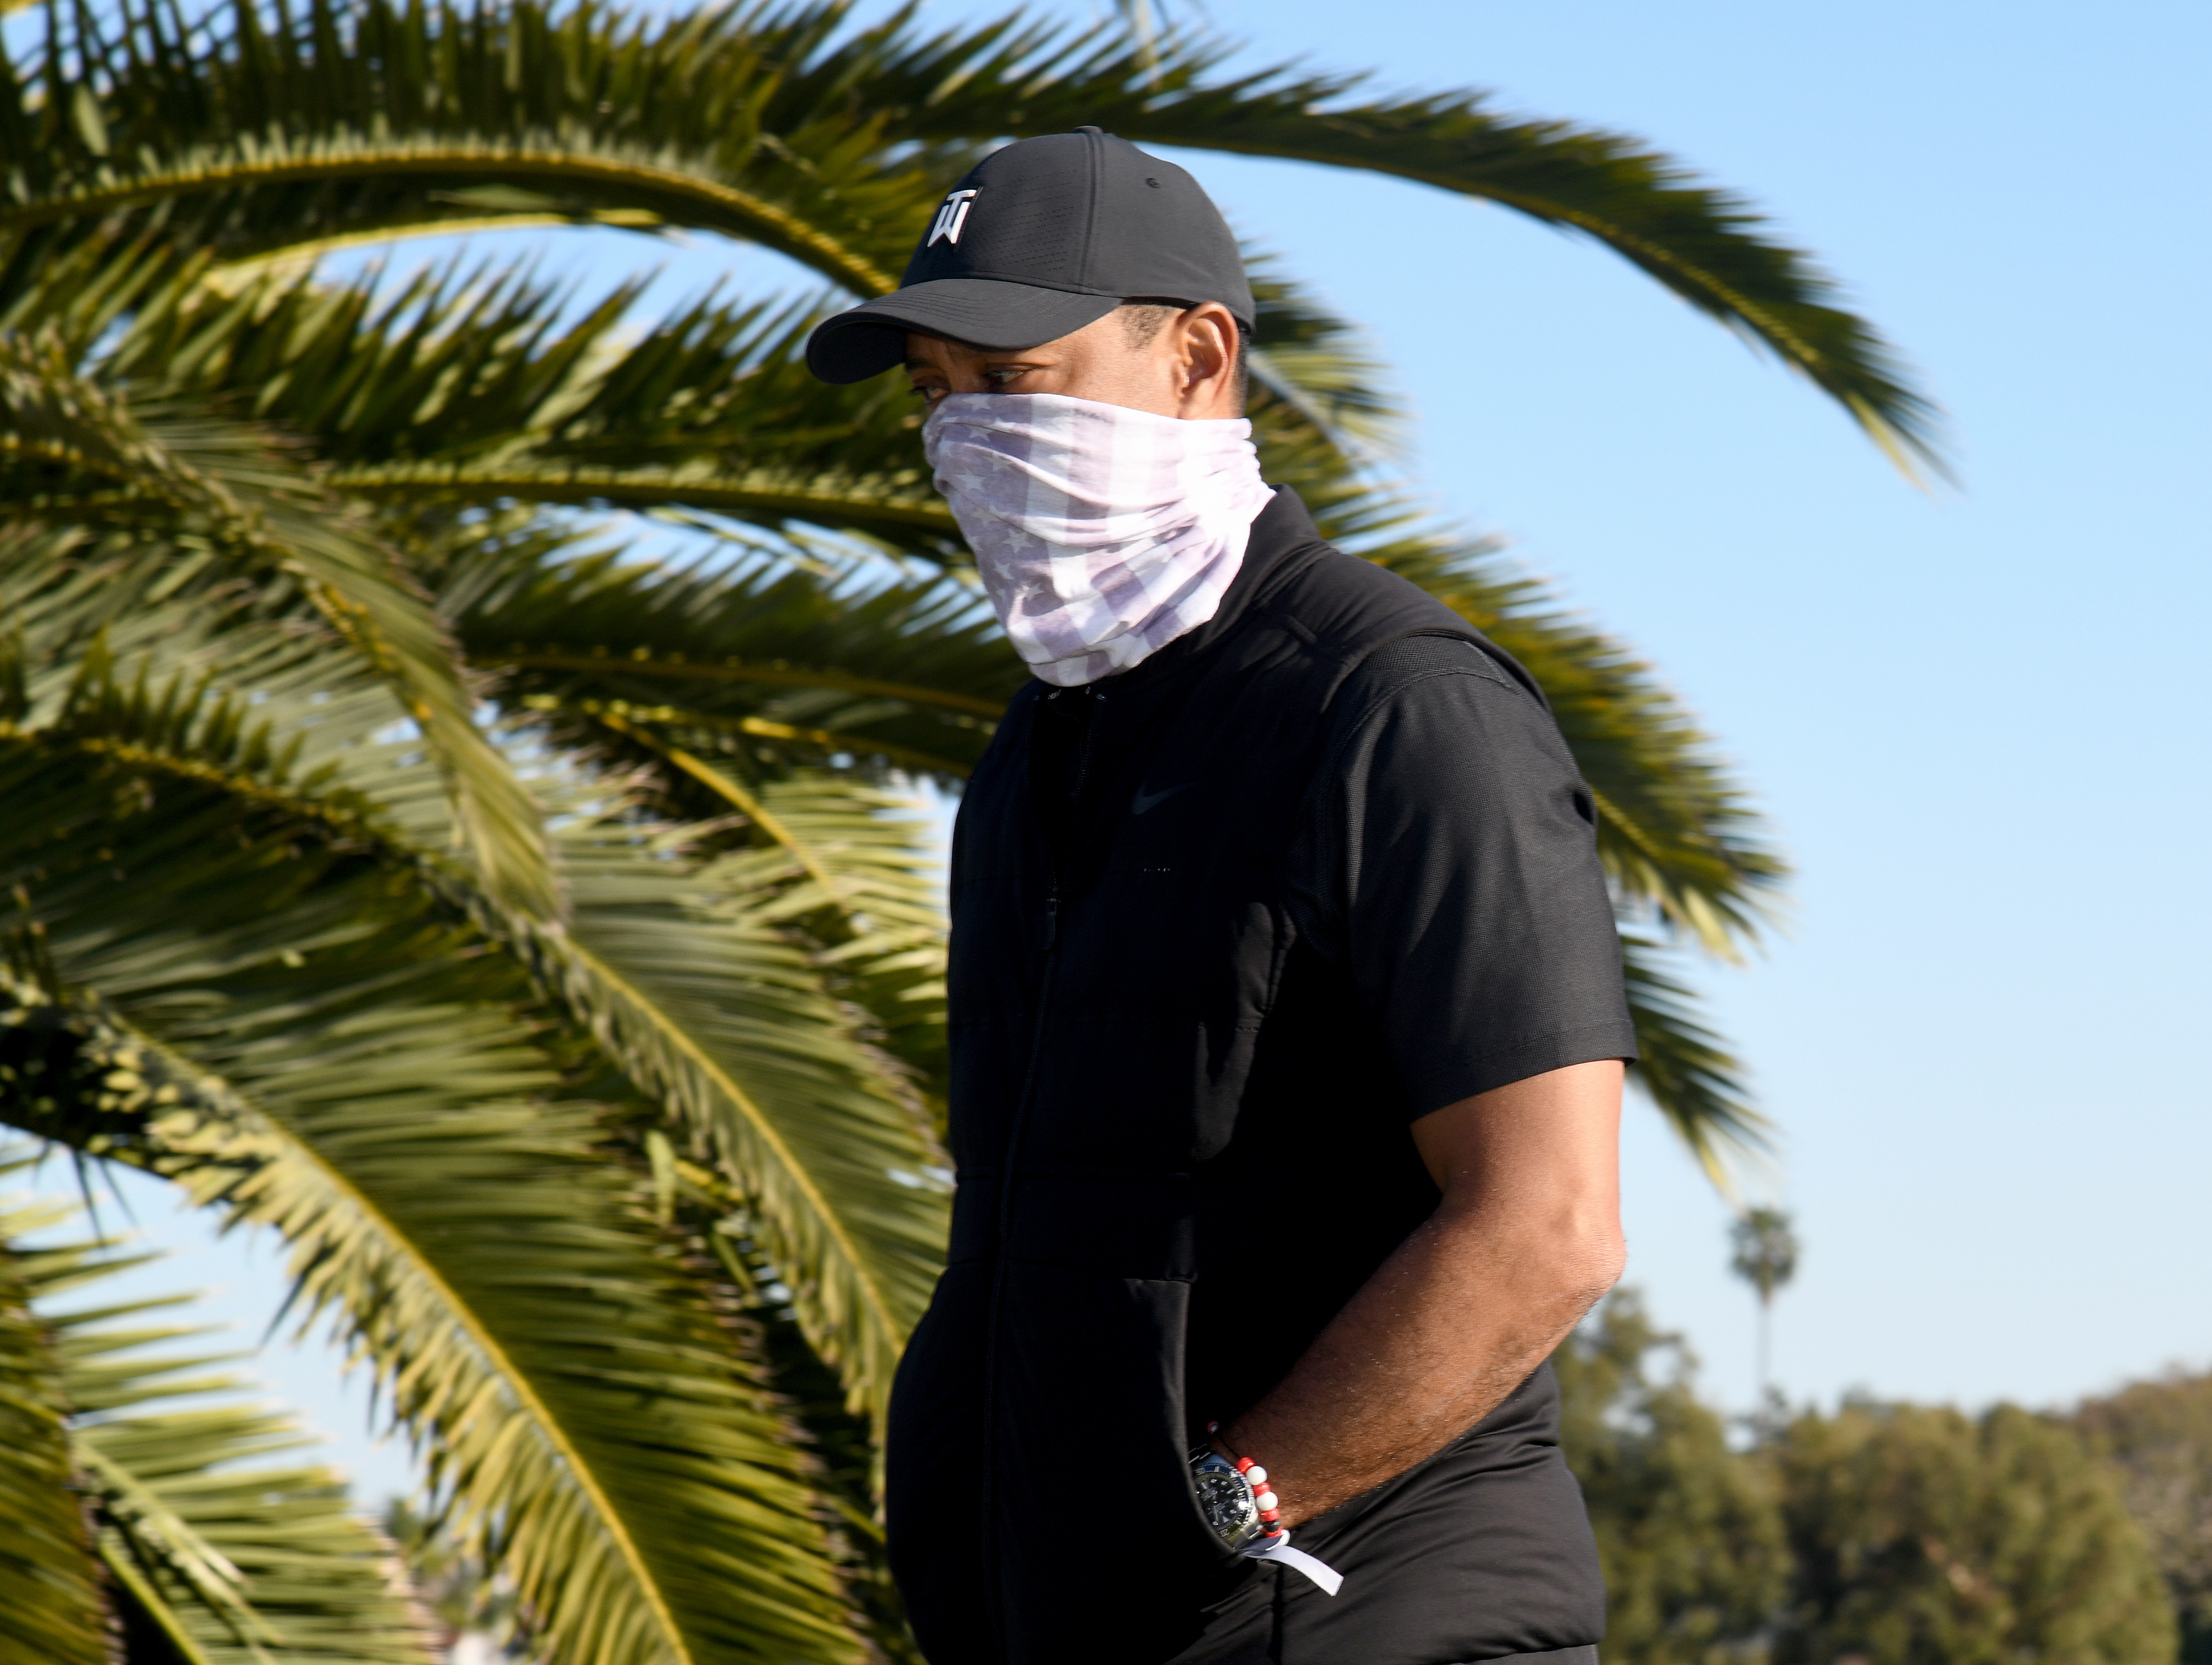 Tiger Woods hangs out at the Genesis Invitational at Riviera Country Club in 2021